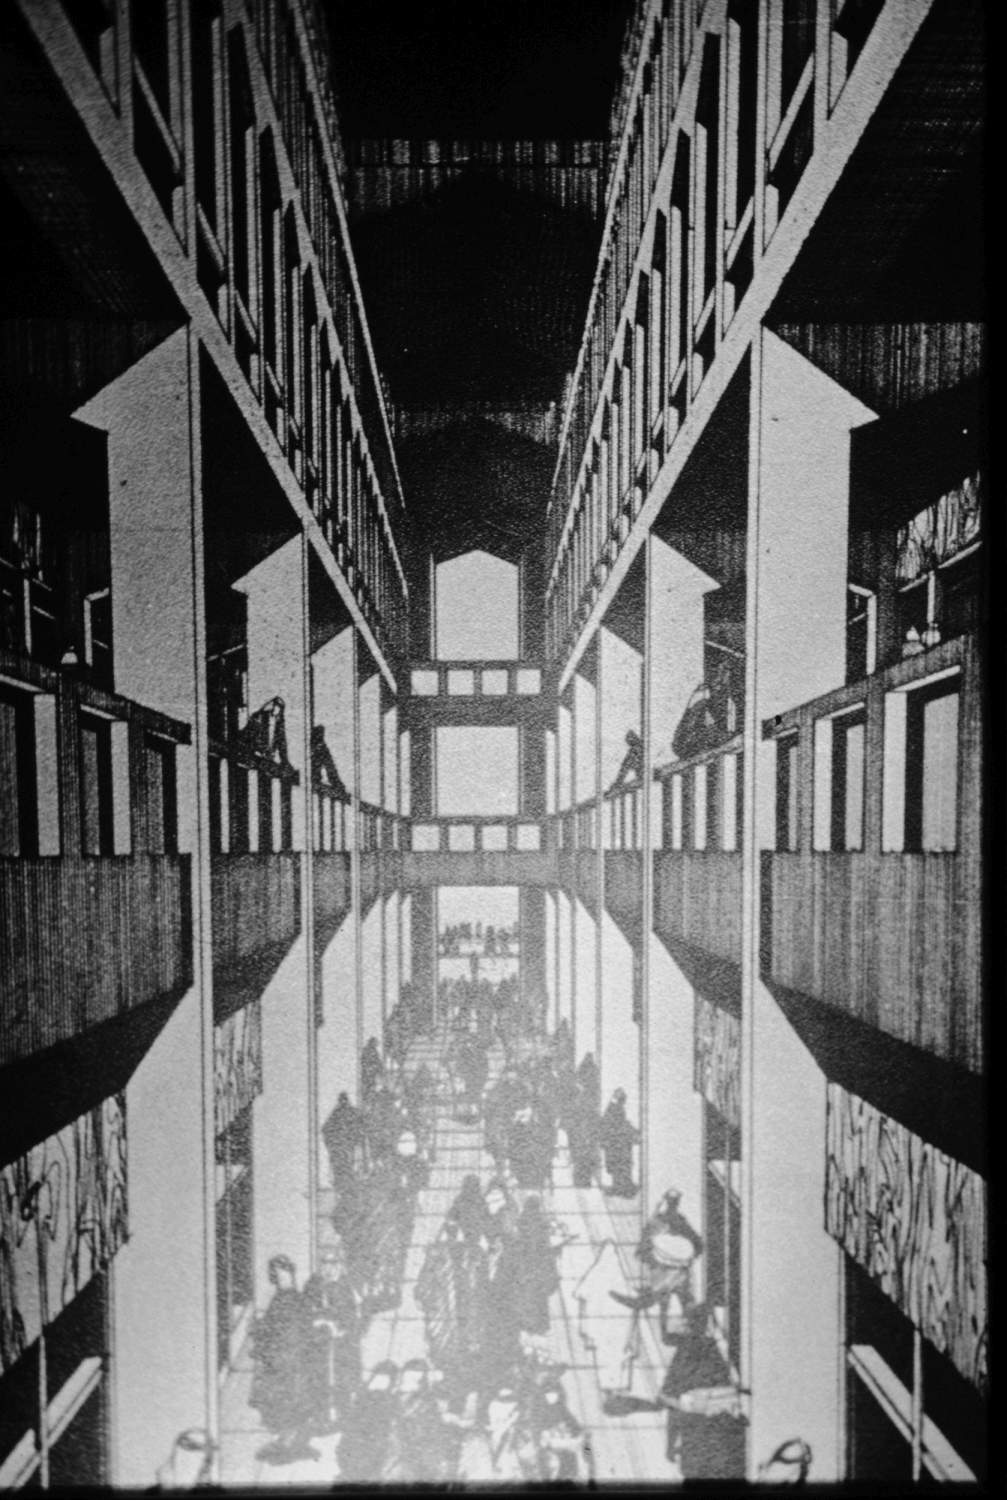 Ink drawing showing interior view through a multilevel, arcade-like space.